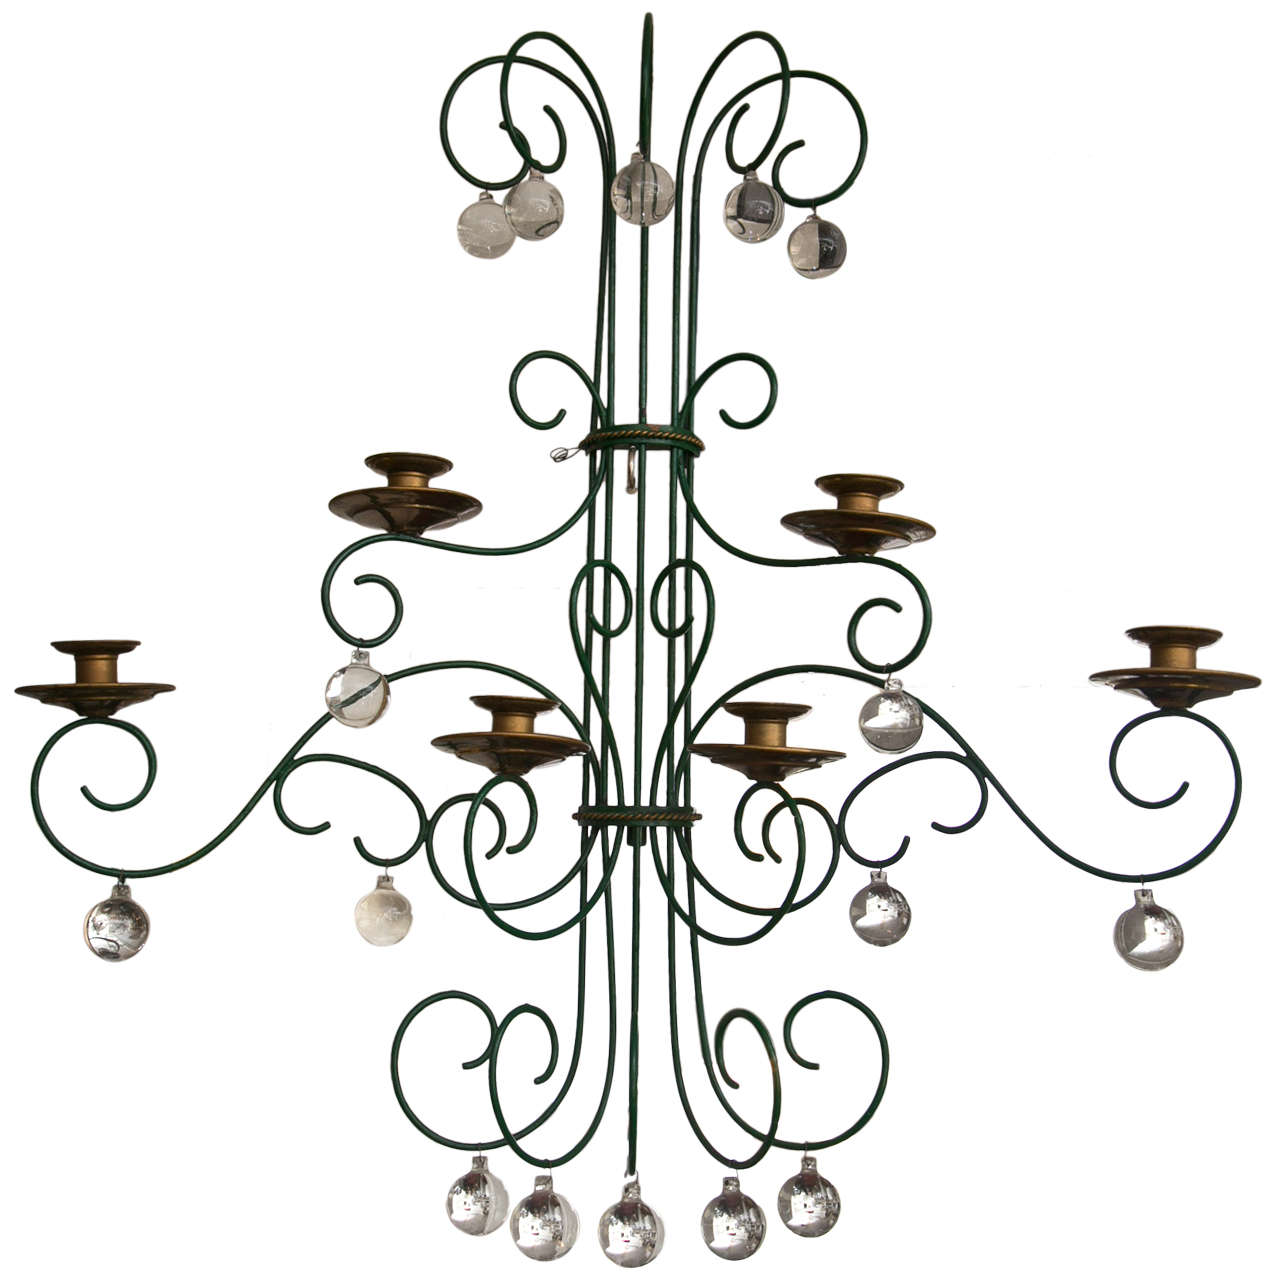 Large and Unique Scrolled Wire Candle Sconce For Sale